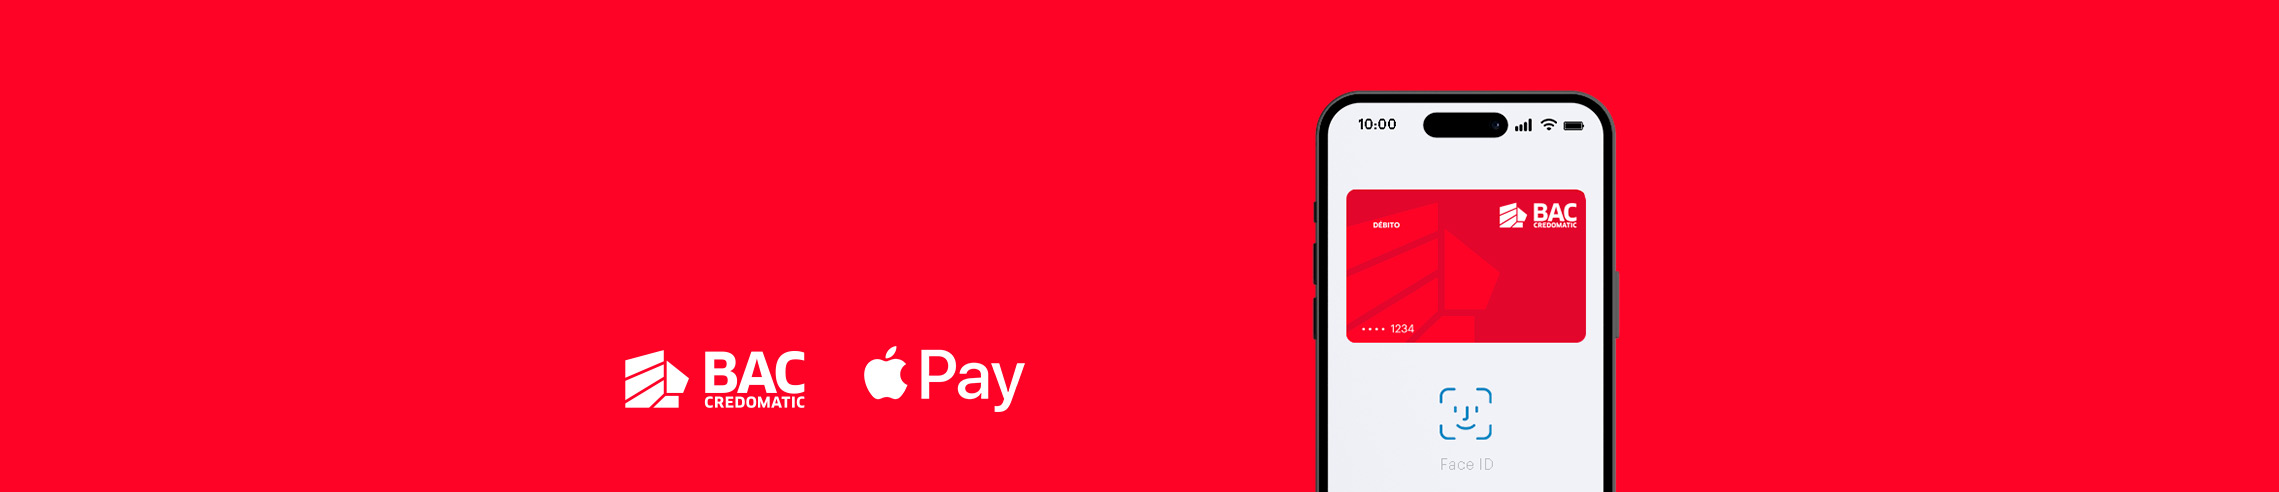 Banner apple pay Bac 